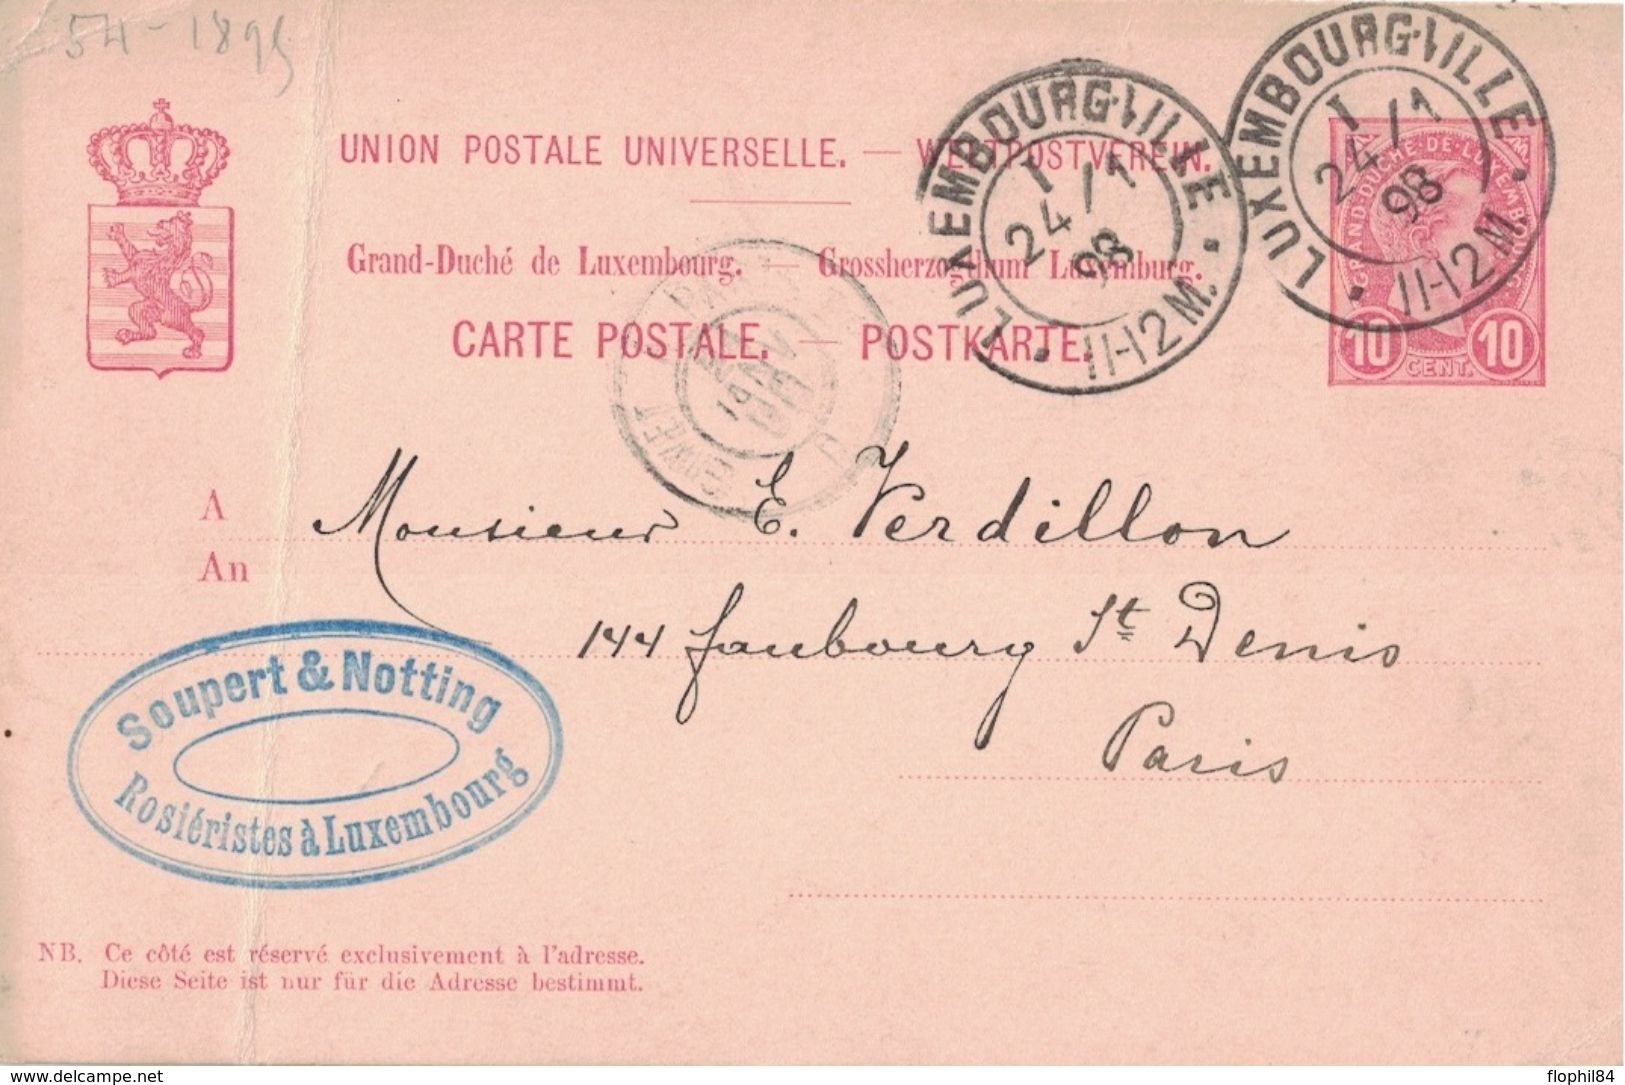 LUXEMBOURG - ENTIER POSTAL - LUXEMBOURGVILLE - 24-1-1898 (P1) - Stamped Stationery